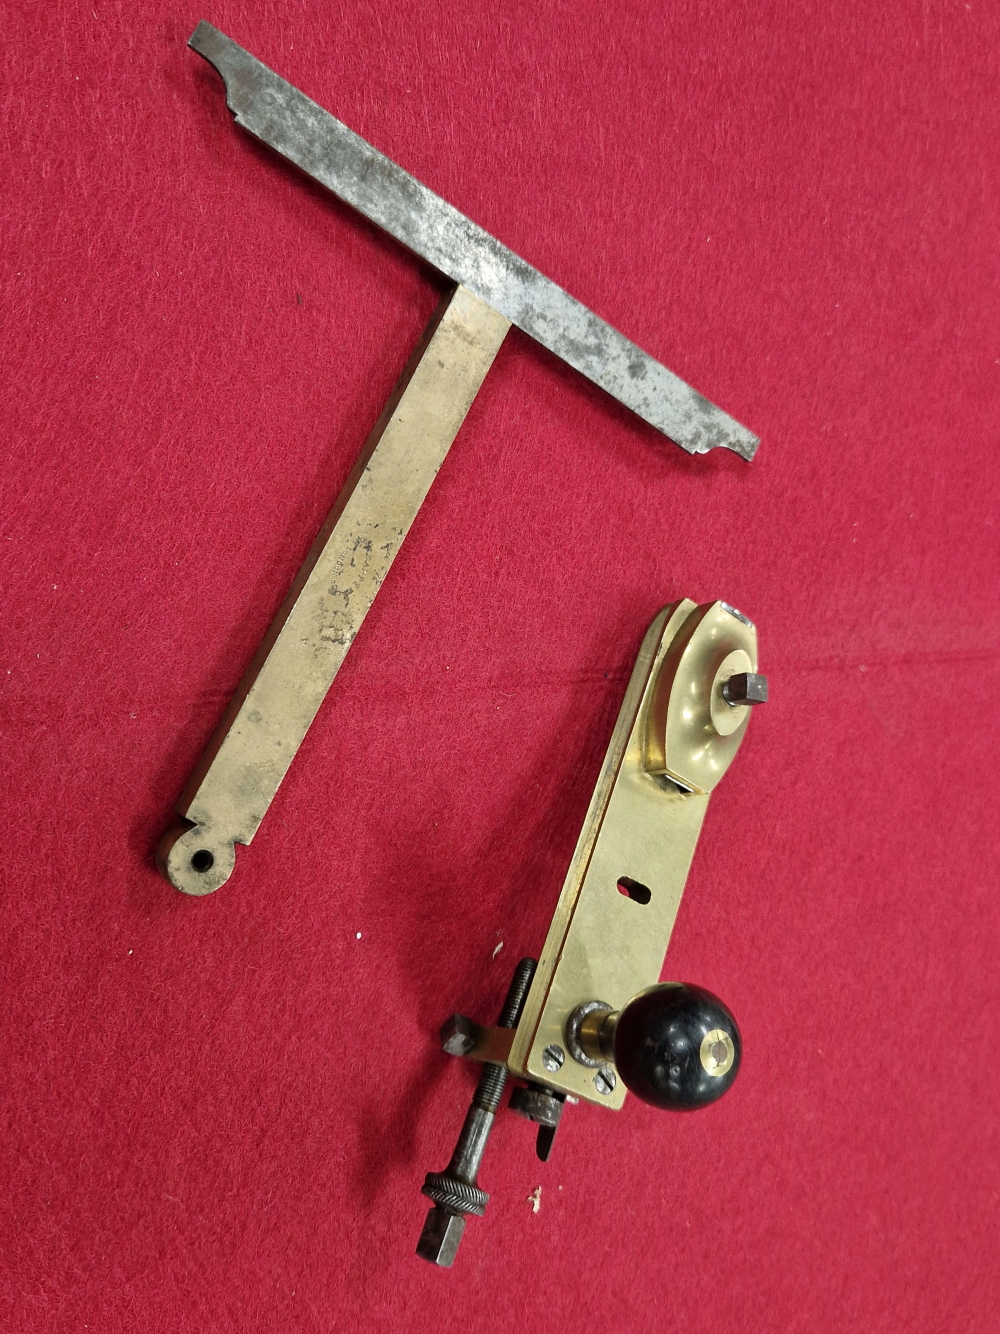 A RARE MID 19TH CENTURY BRASS AND IRON ORNAMENTAL TURNING LATHE SIGNED C. RICH, 44 DENMARK STREET - Image 28 of 77